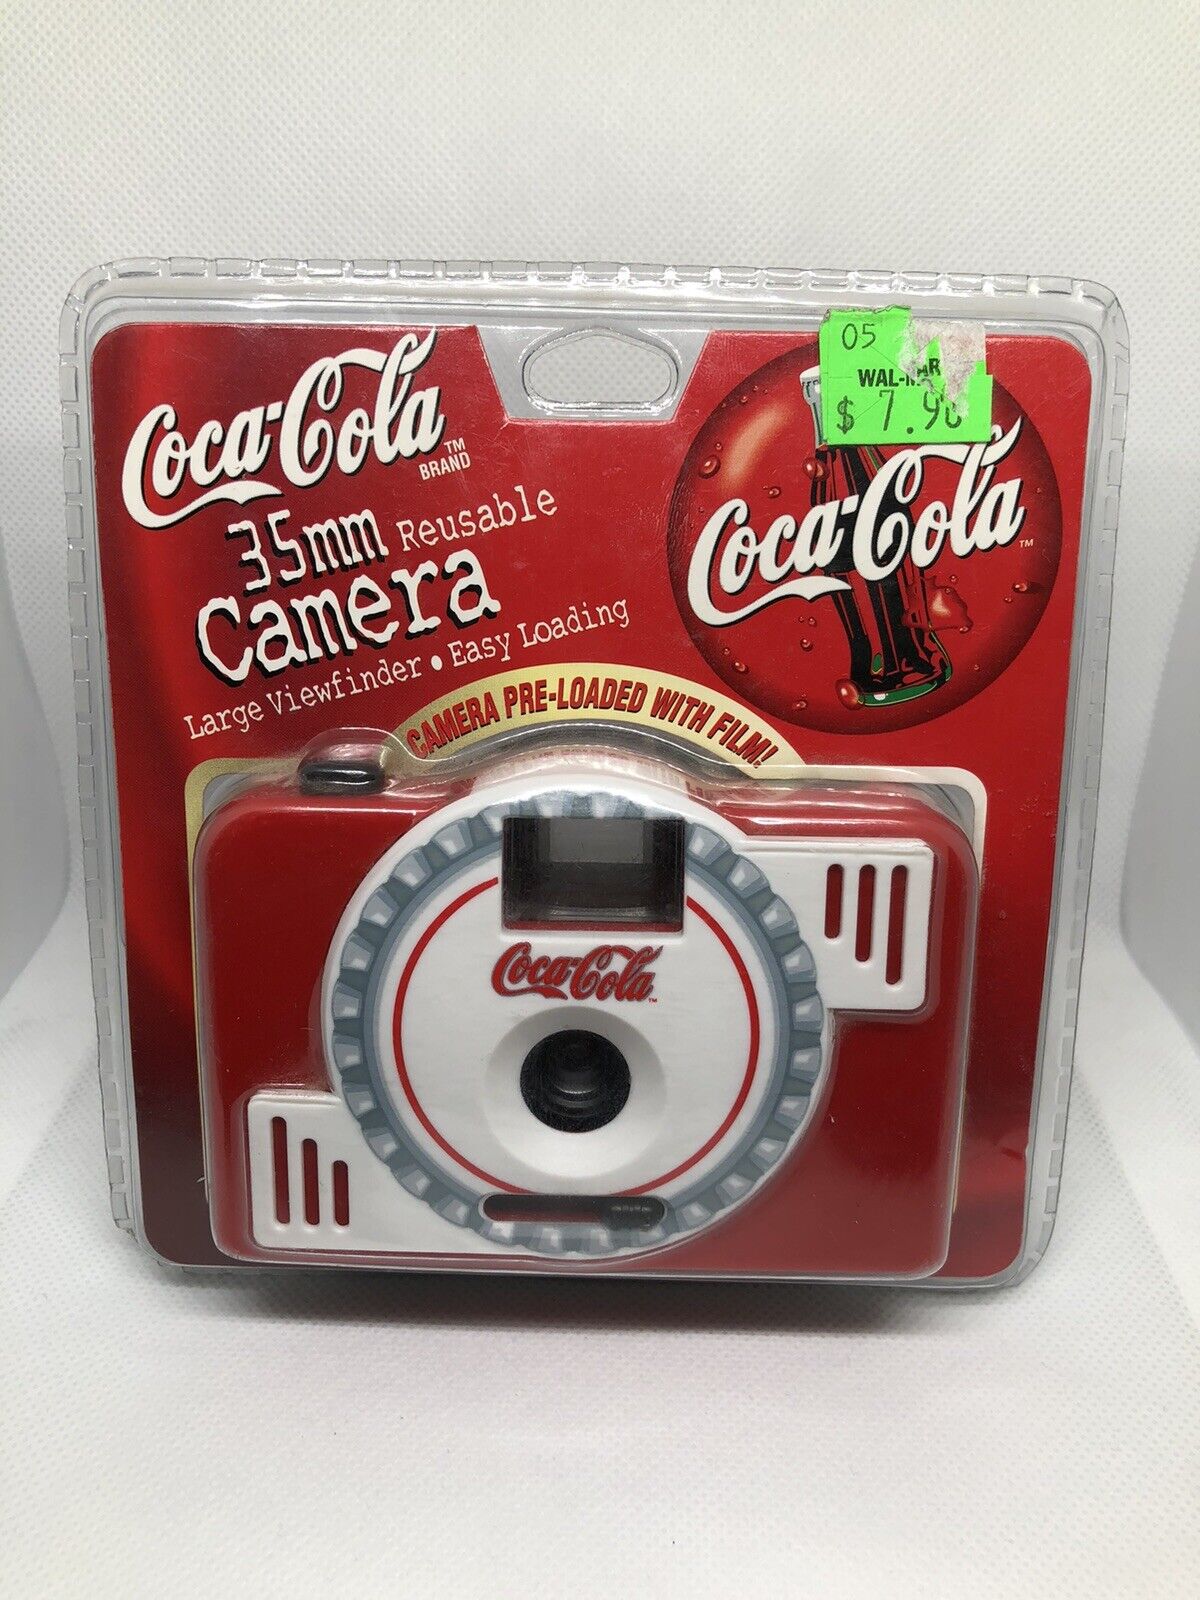 Vintage 1999 Coca Cola 35mm Reusable Camera with Large Viewfinder W/ Film